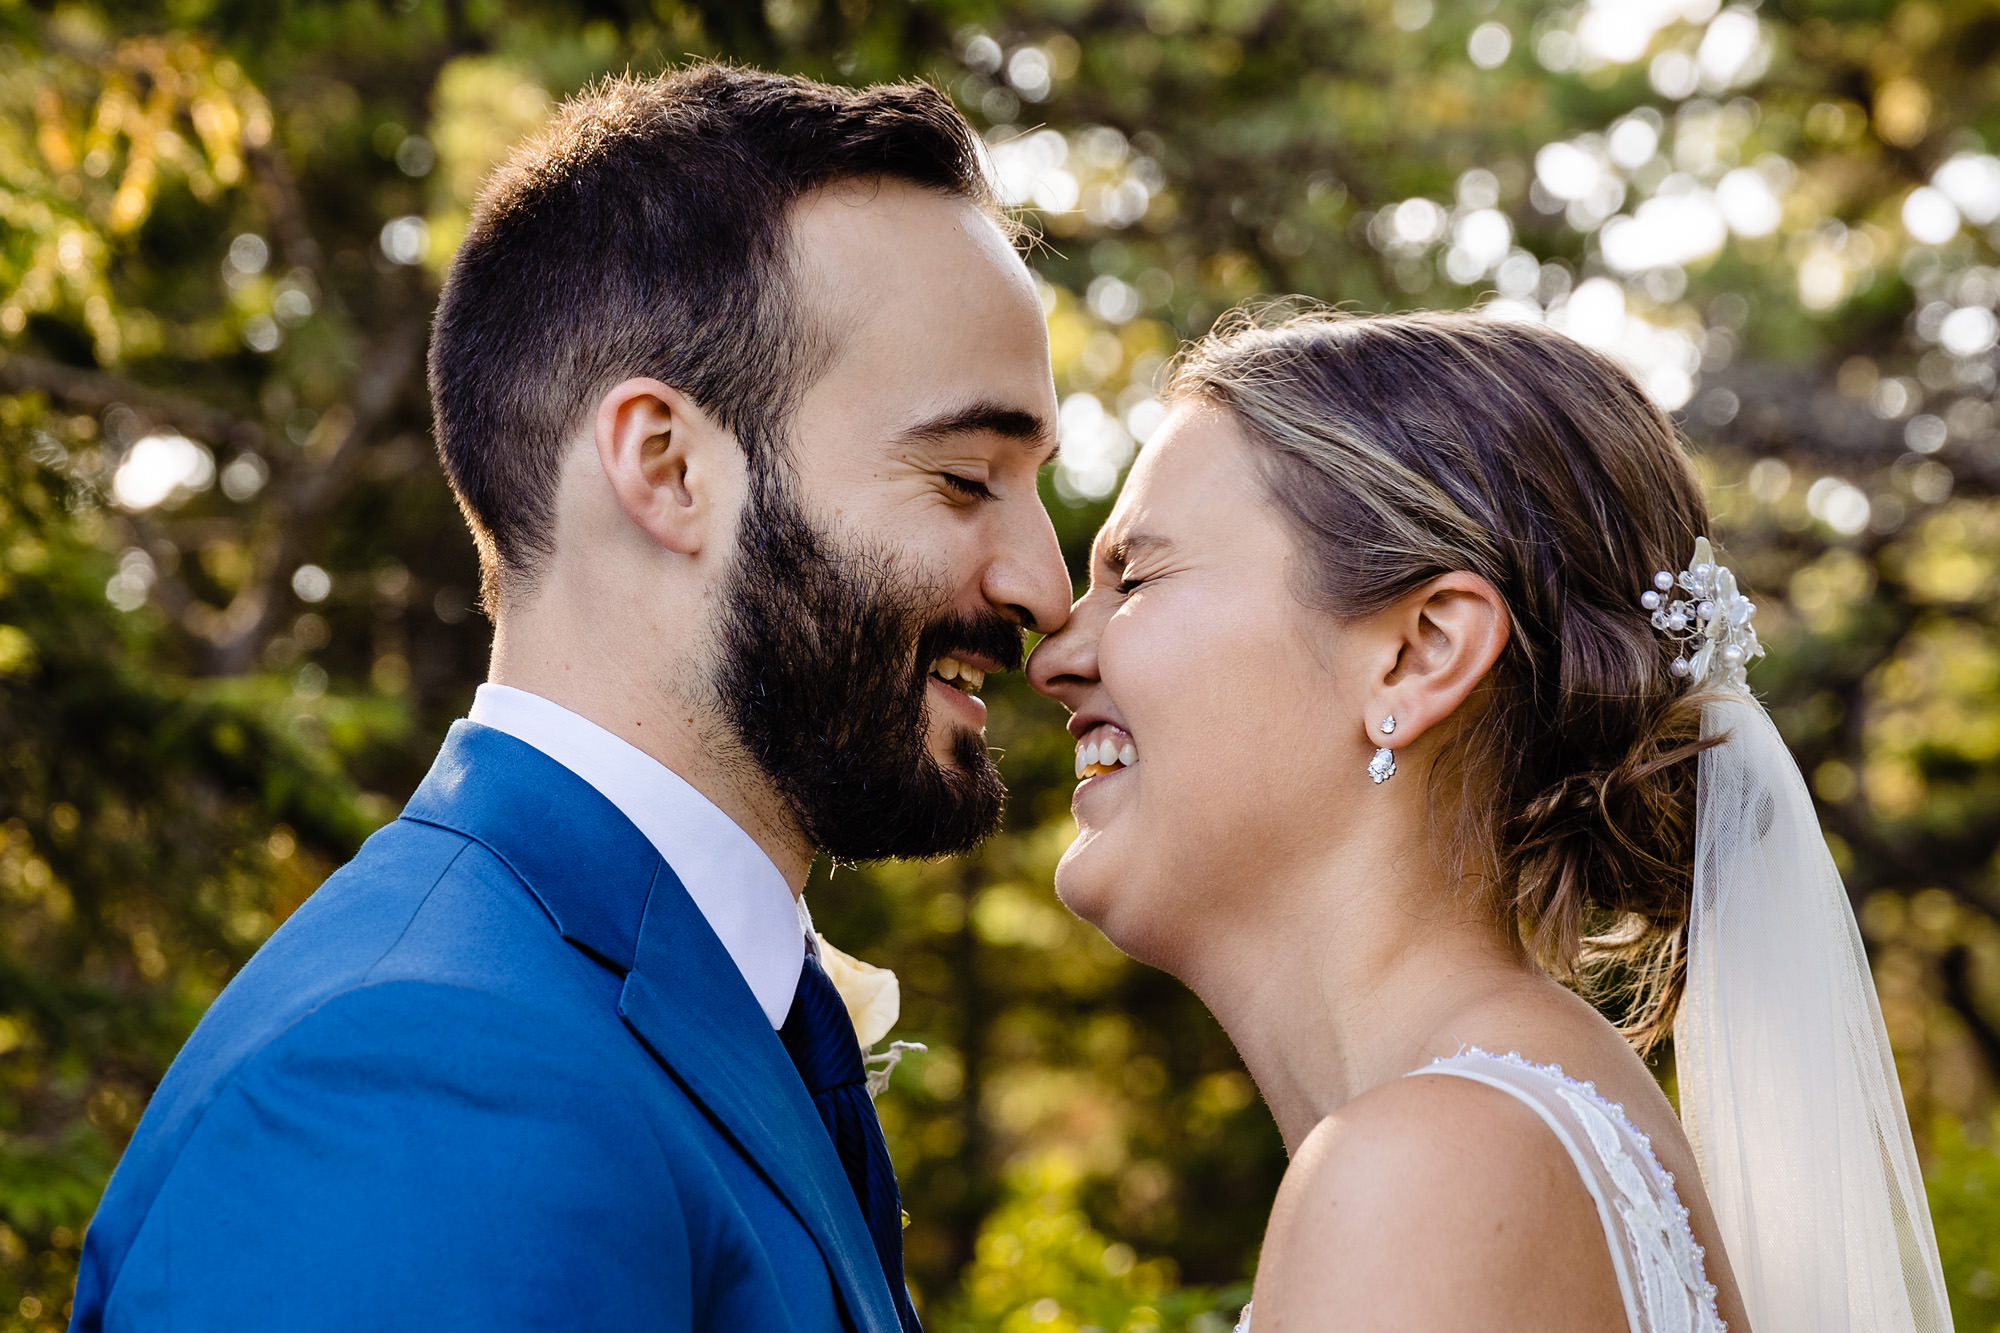 Stunning wedding portraits at a pond in Acadia National Park